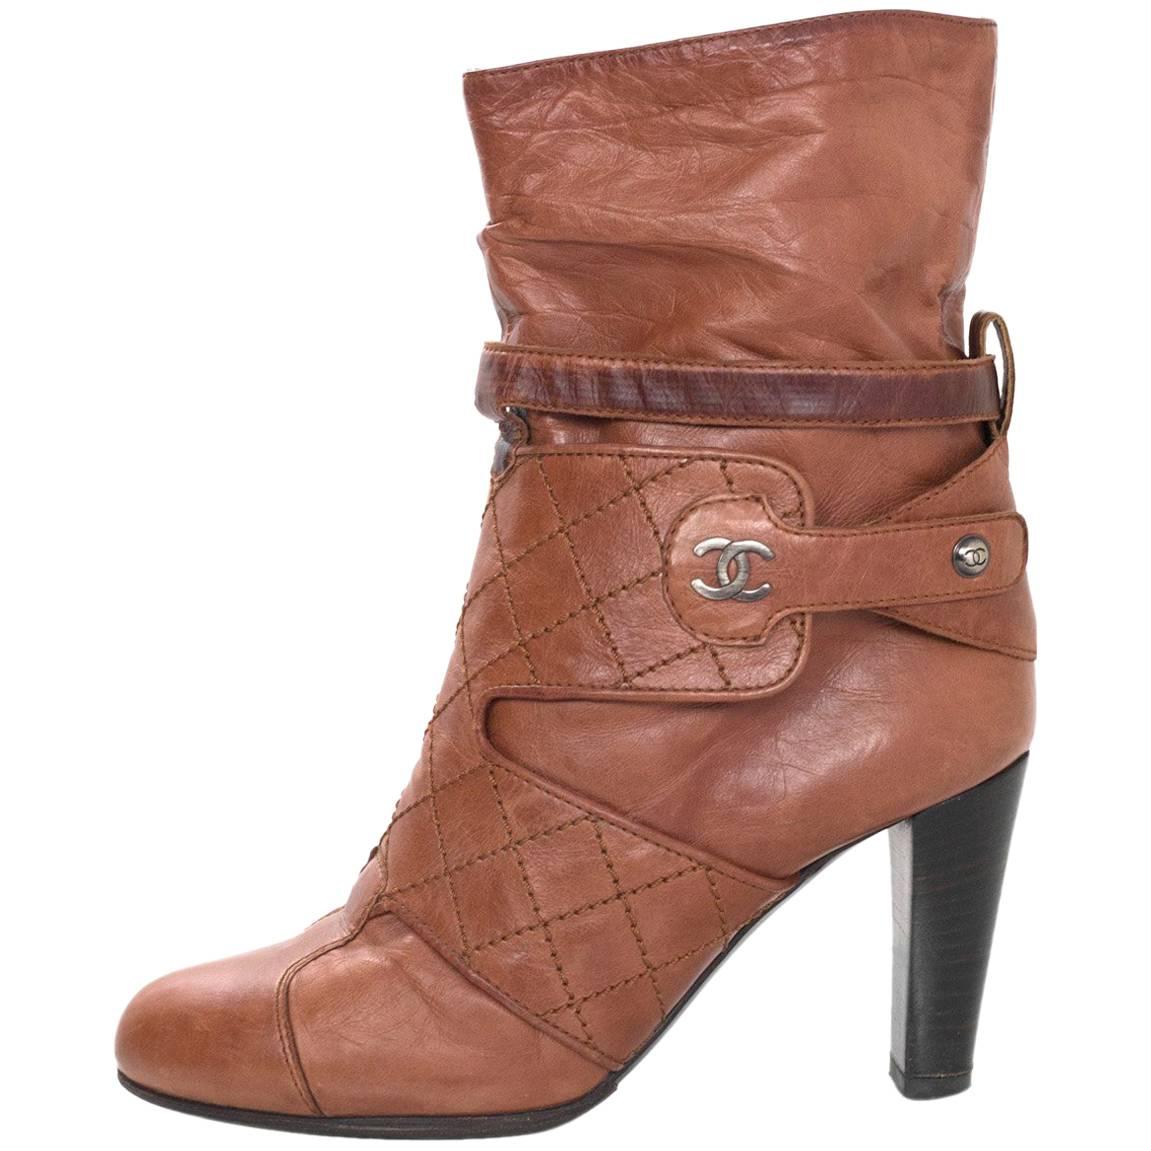 Chanel Tan Leather Ankle Boots Sz 37